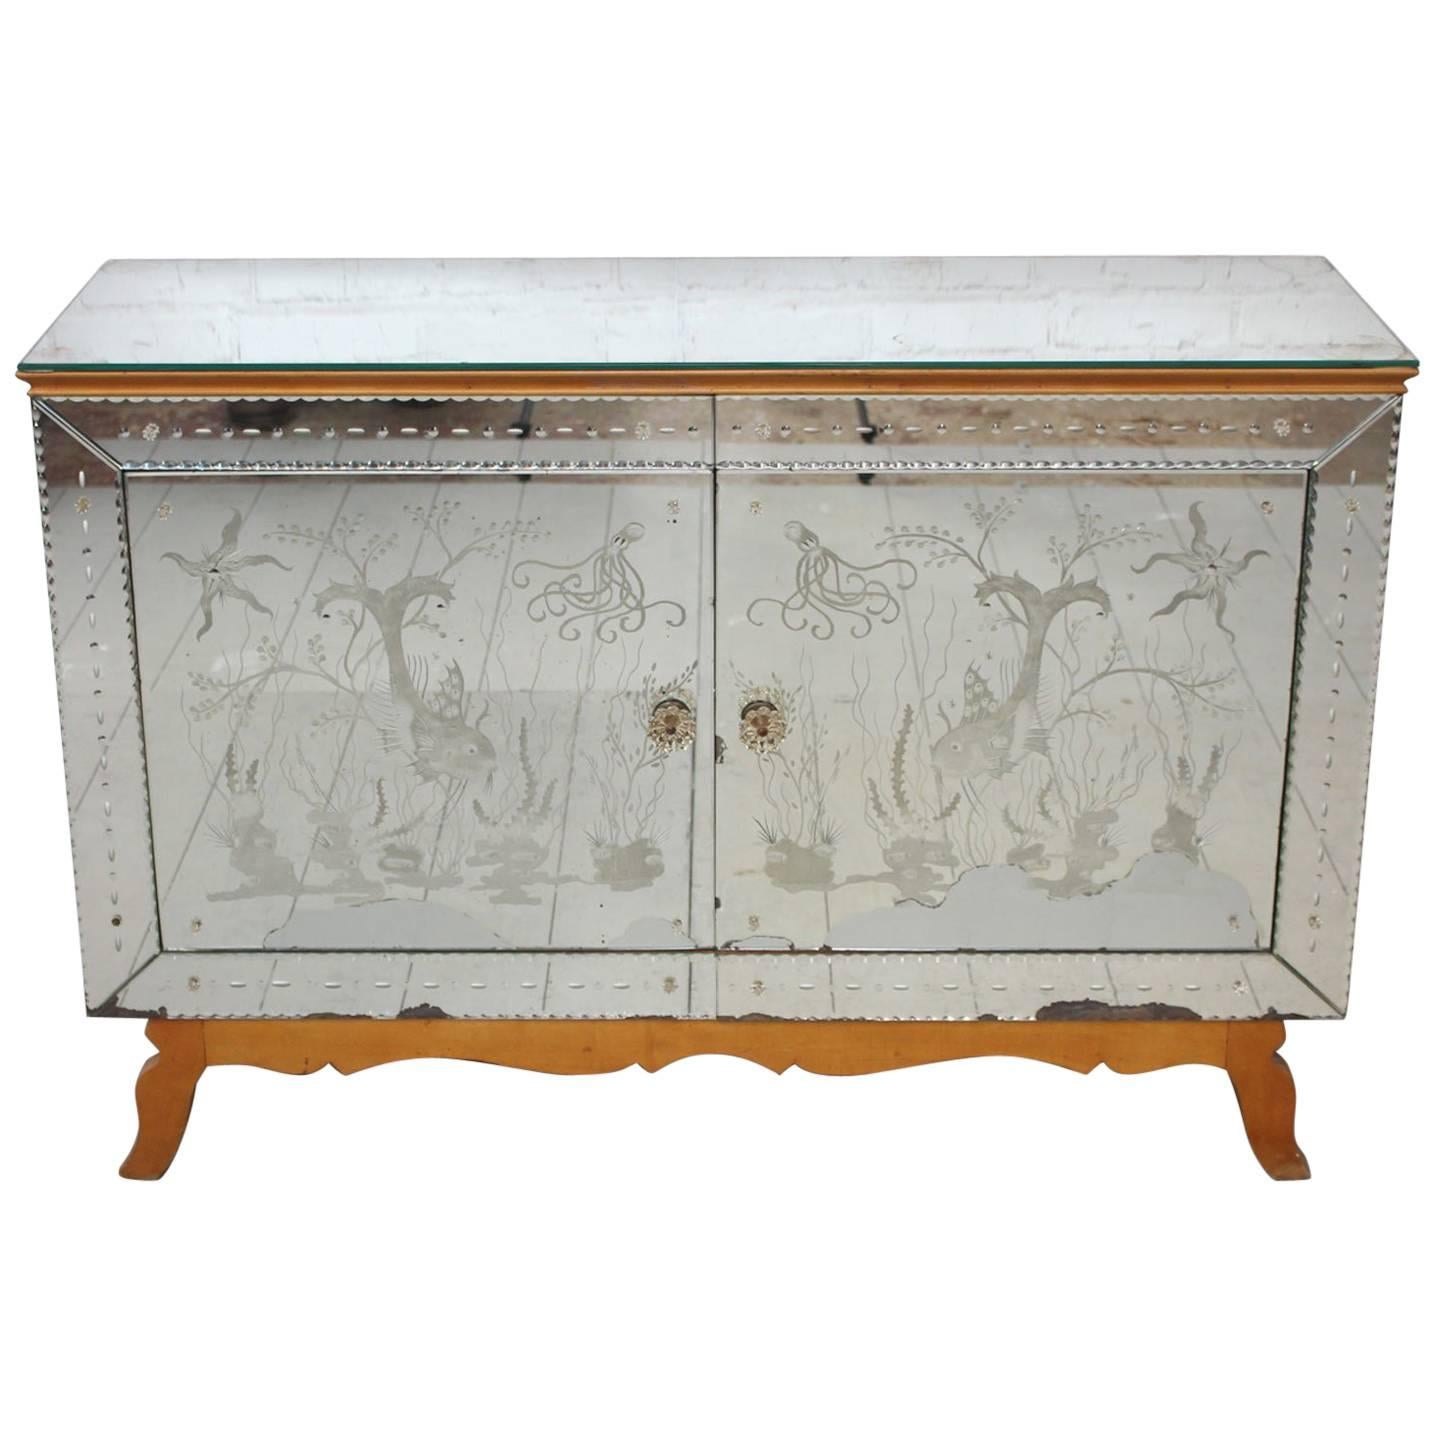 Midcentury Etched, Mirrored French Sideboard Cabinet